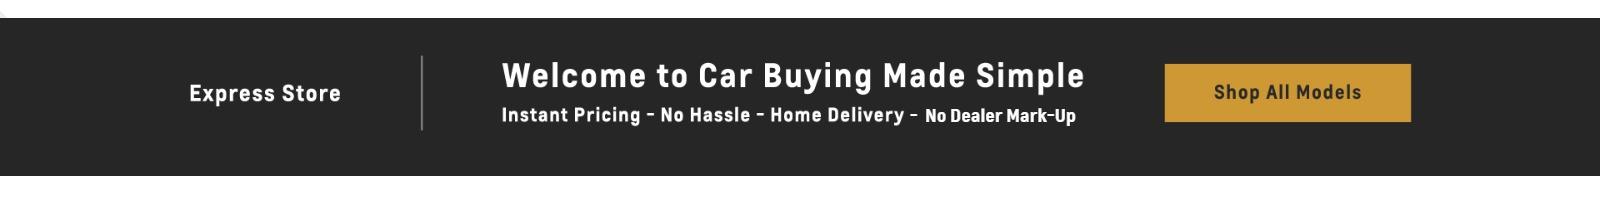 Welcome to Car Buying Made Simple 
Instant Pricing - No Hassle - Home Delivery - No Dealer Mark-Up